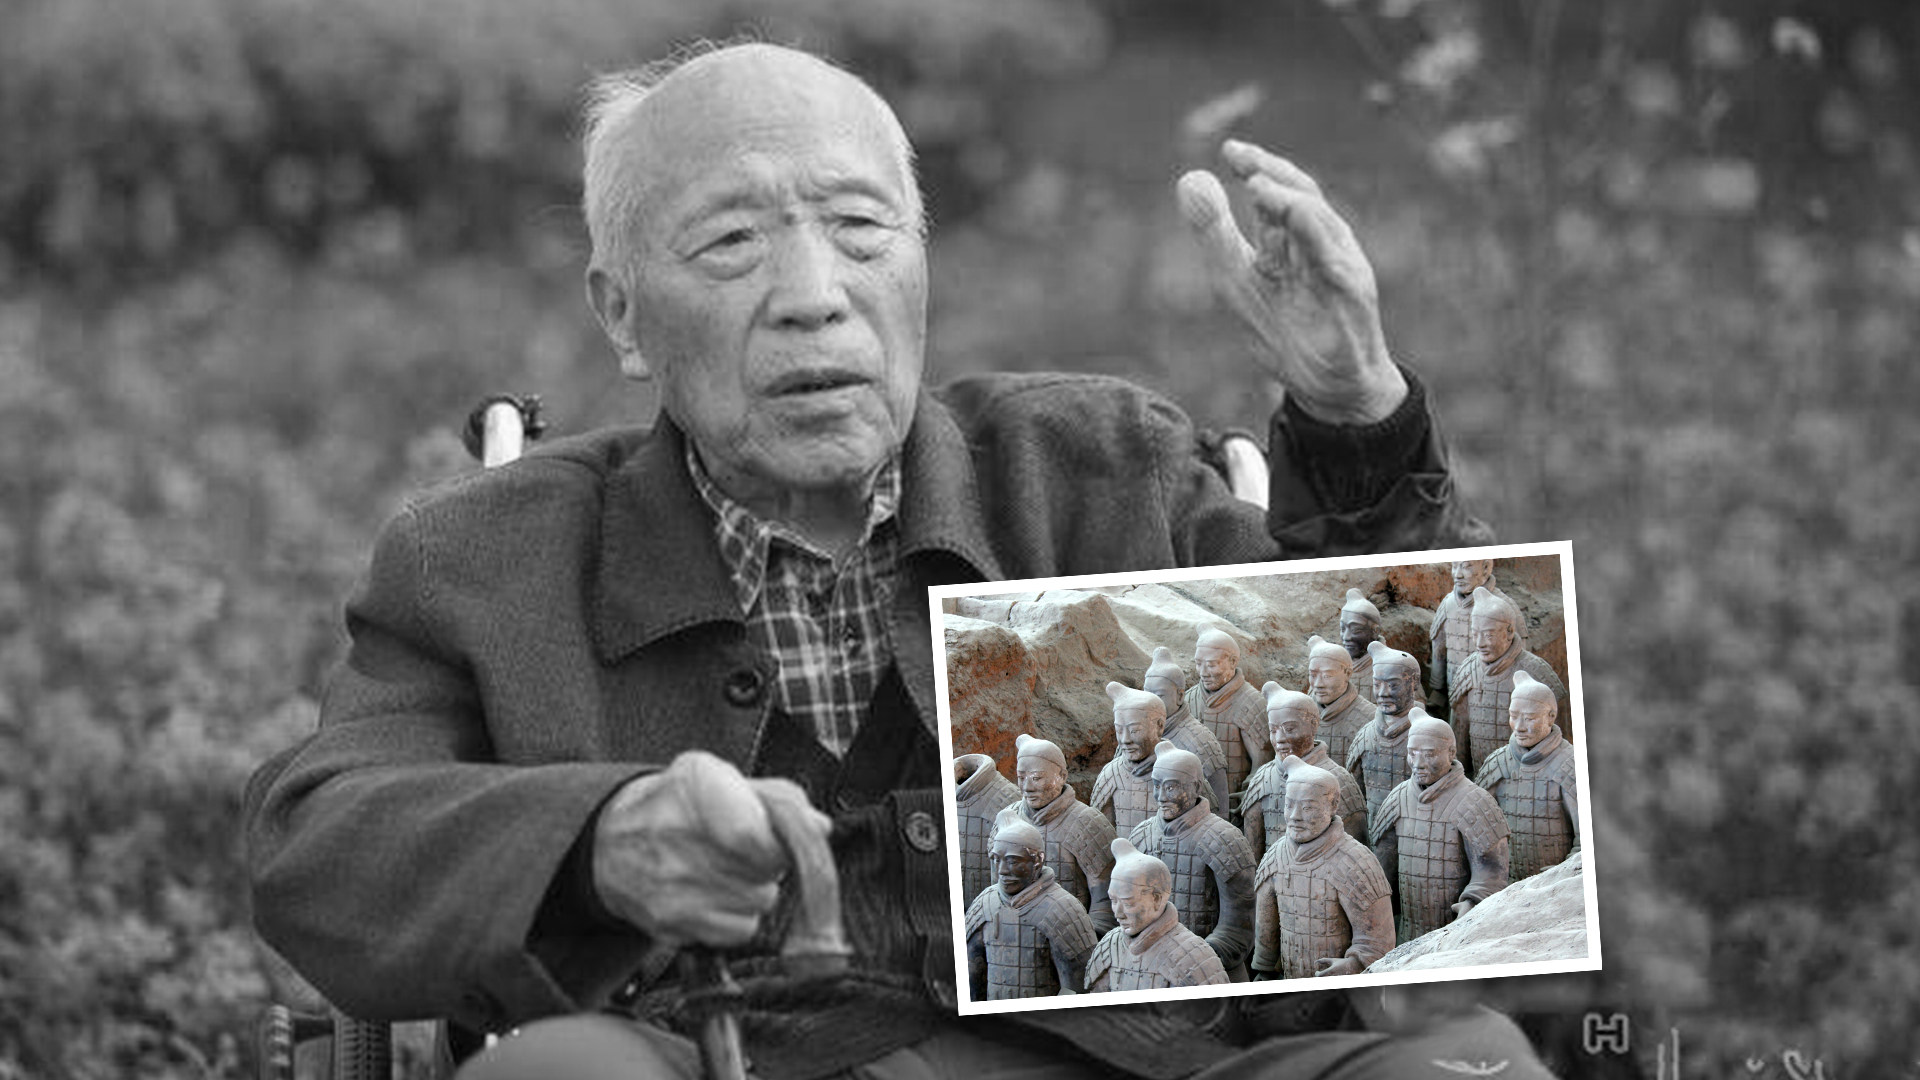 Shi Xingbang, a pioneer in Chinese archaeology, has died at the age of 99. Photo: SCMP composite
